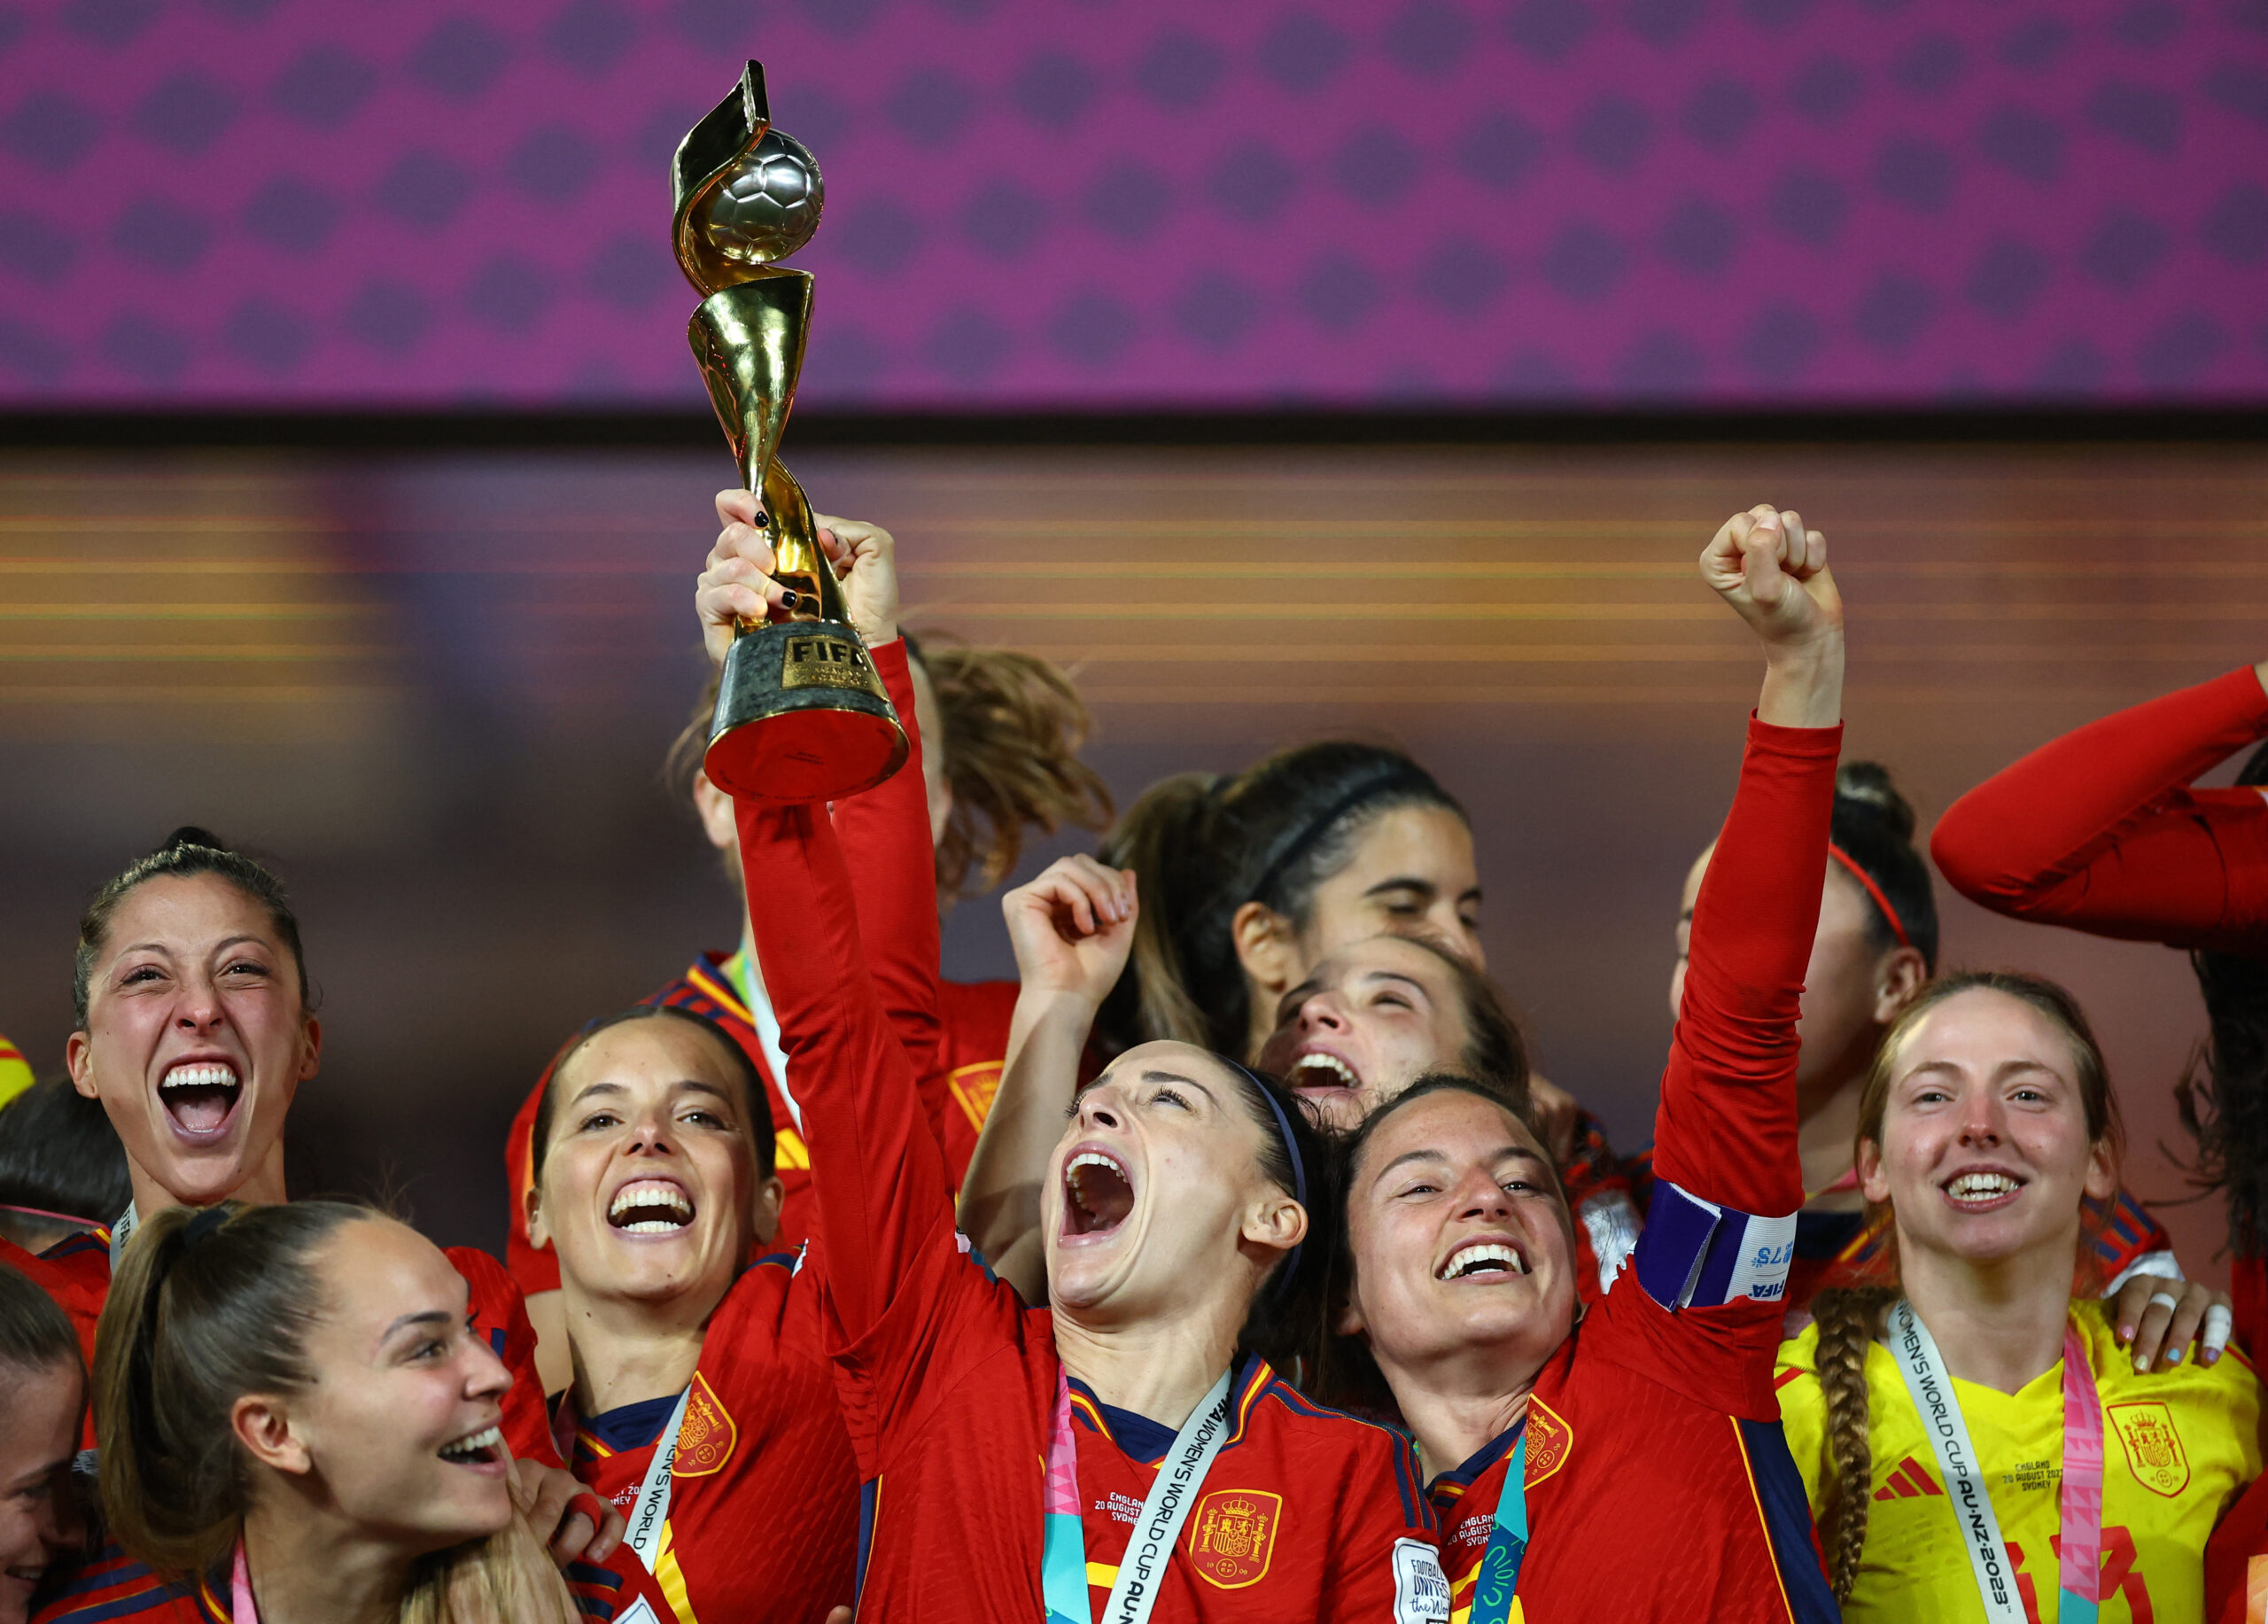 Soccer Football - FIFA Women's World Cup Australia and New Zealand 2023 - Final - Spain v England - Stadium Australia, Sydney, Australia - August 20, 2023 Spain celebrate with the trophy after winning the world cup REUTERS/Hannah Mckay